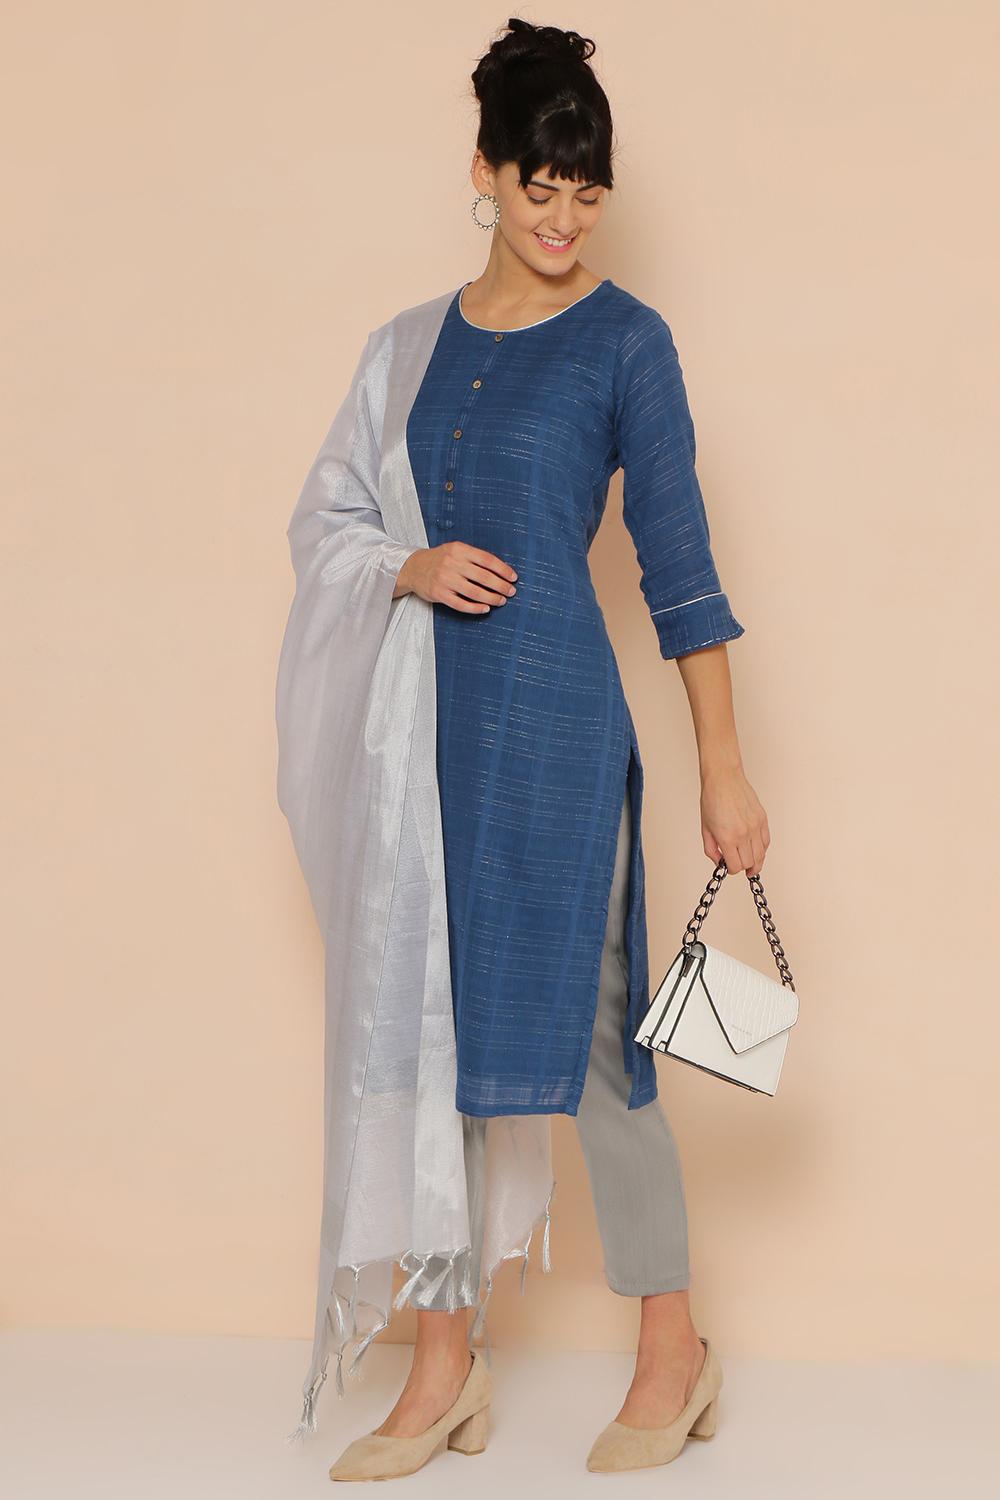 Buy Online Royal Blue Cotton Straight Kurta for Women at Best Price at